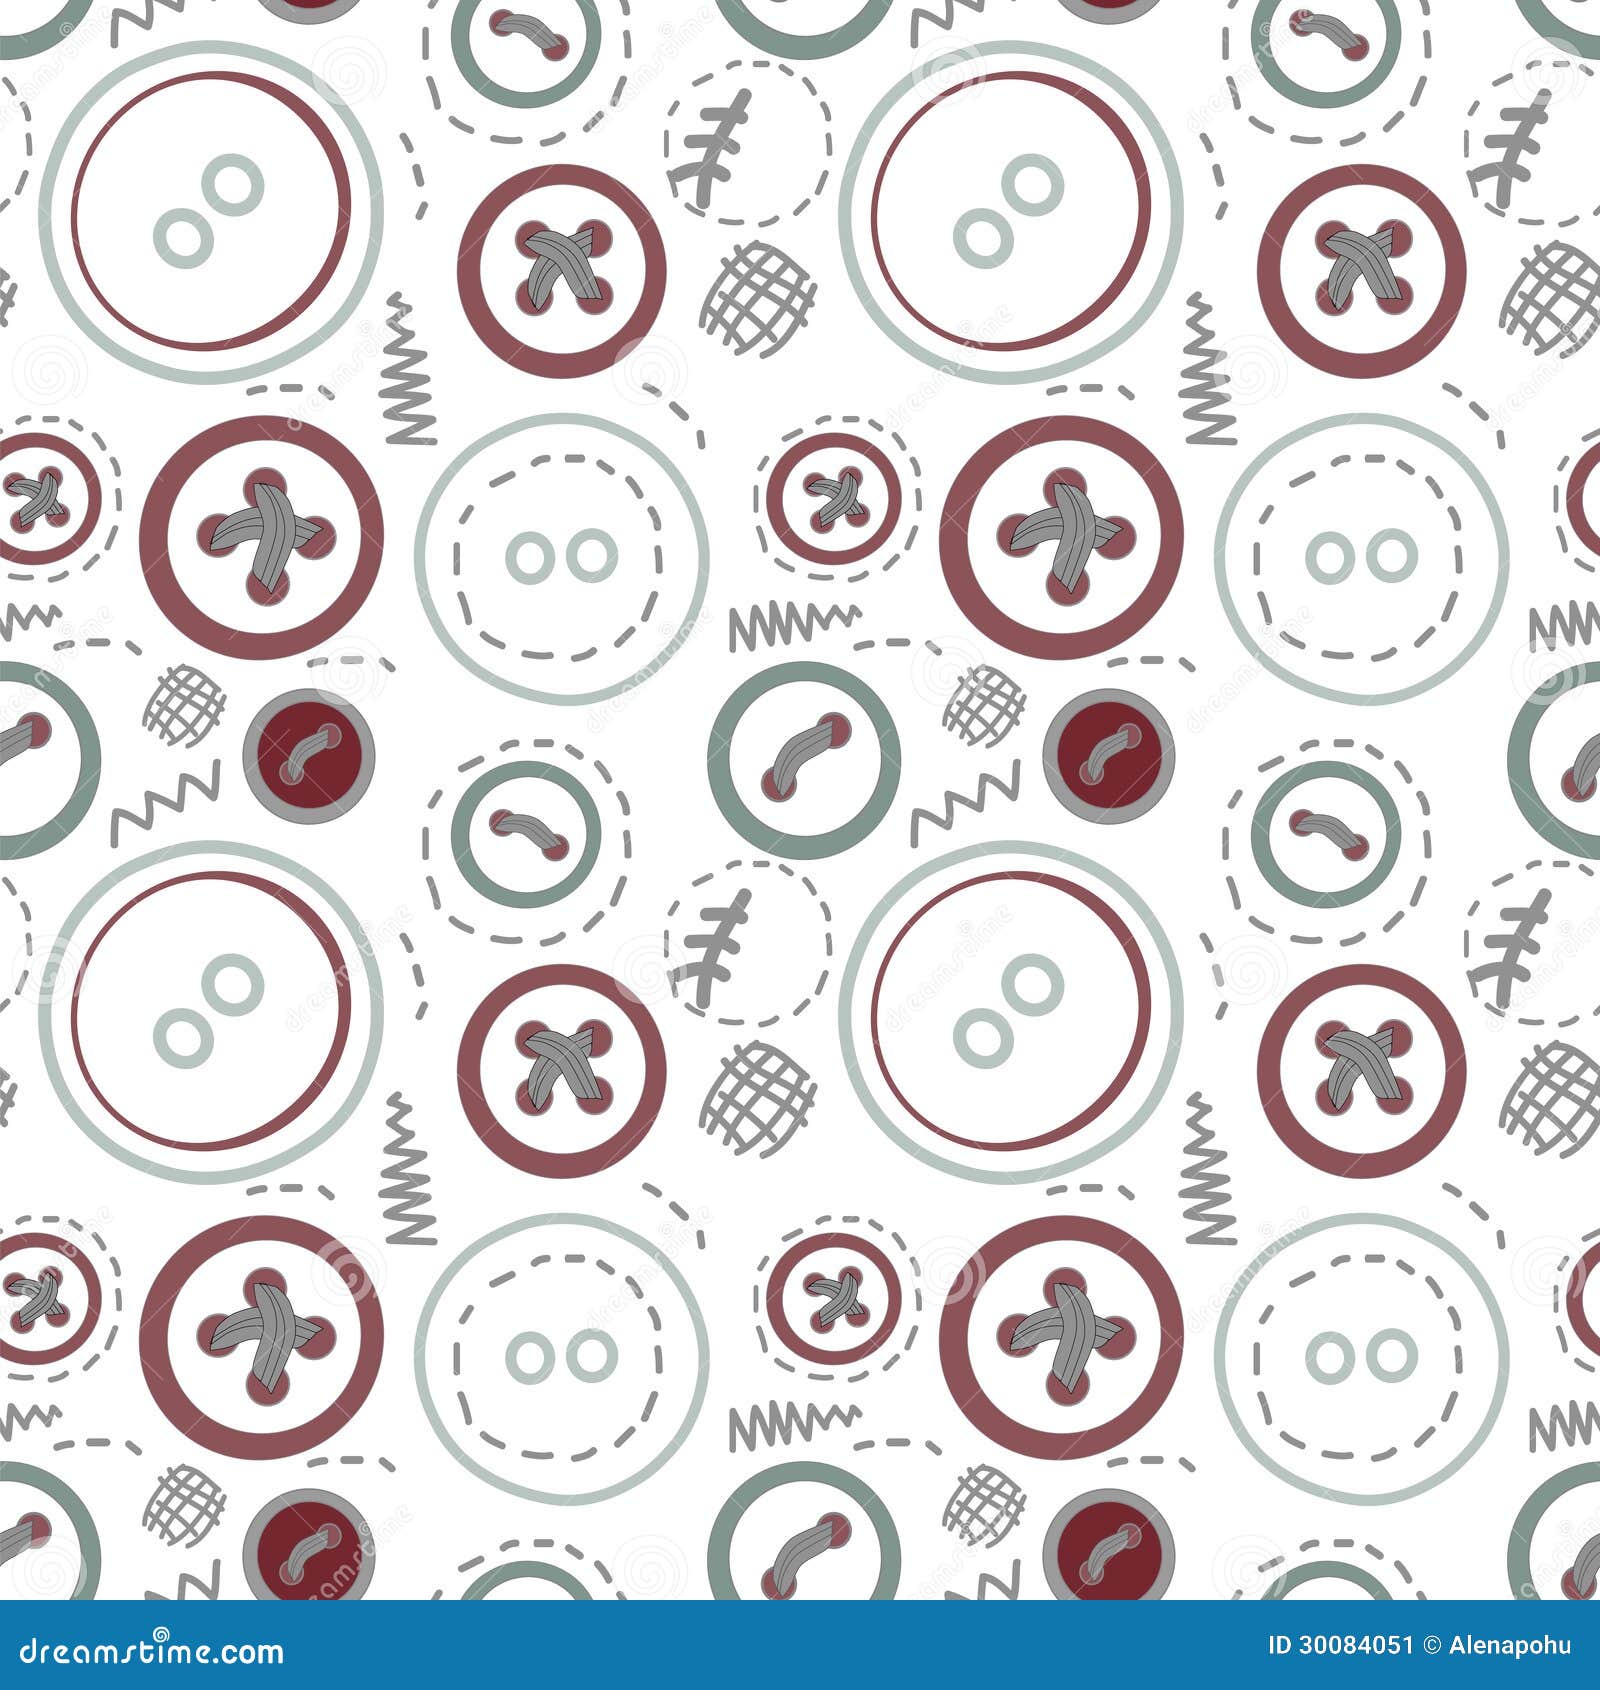 vintage buttons sew seamless pattern